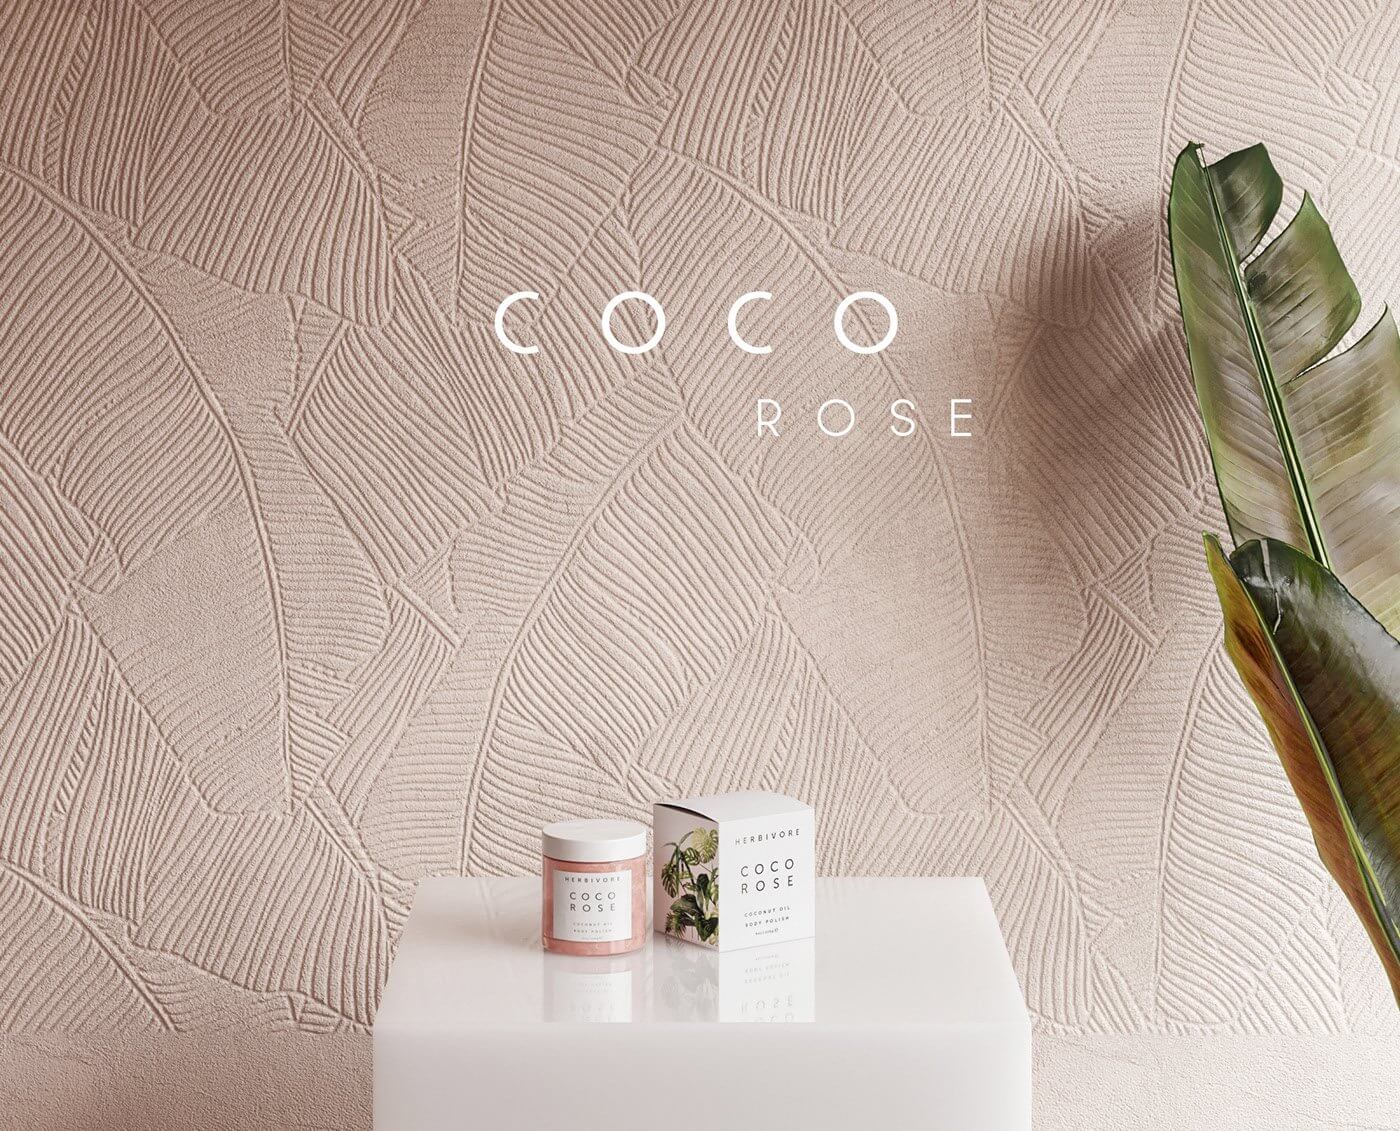 Clothing boutique store merchant products coco rose - cgi visualization